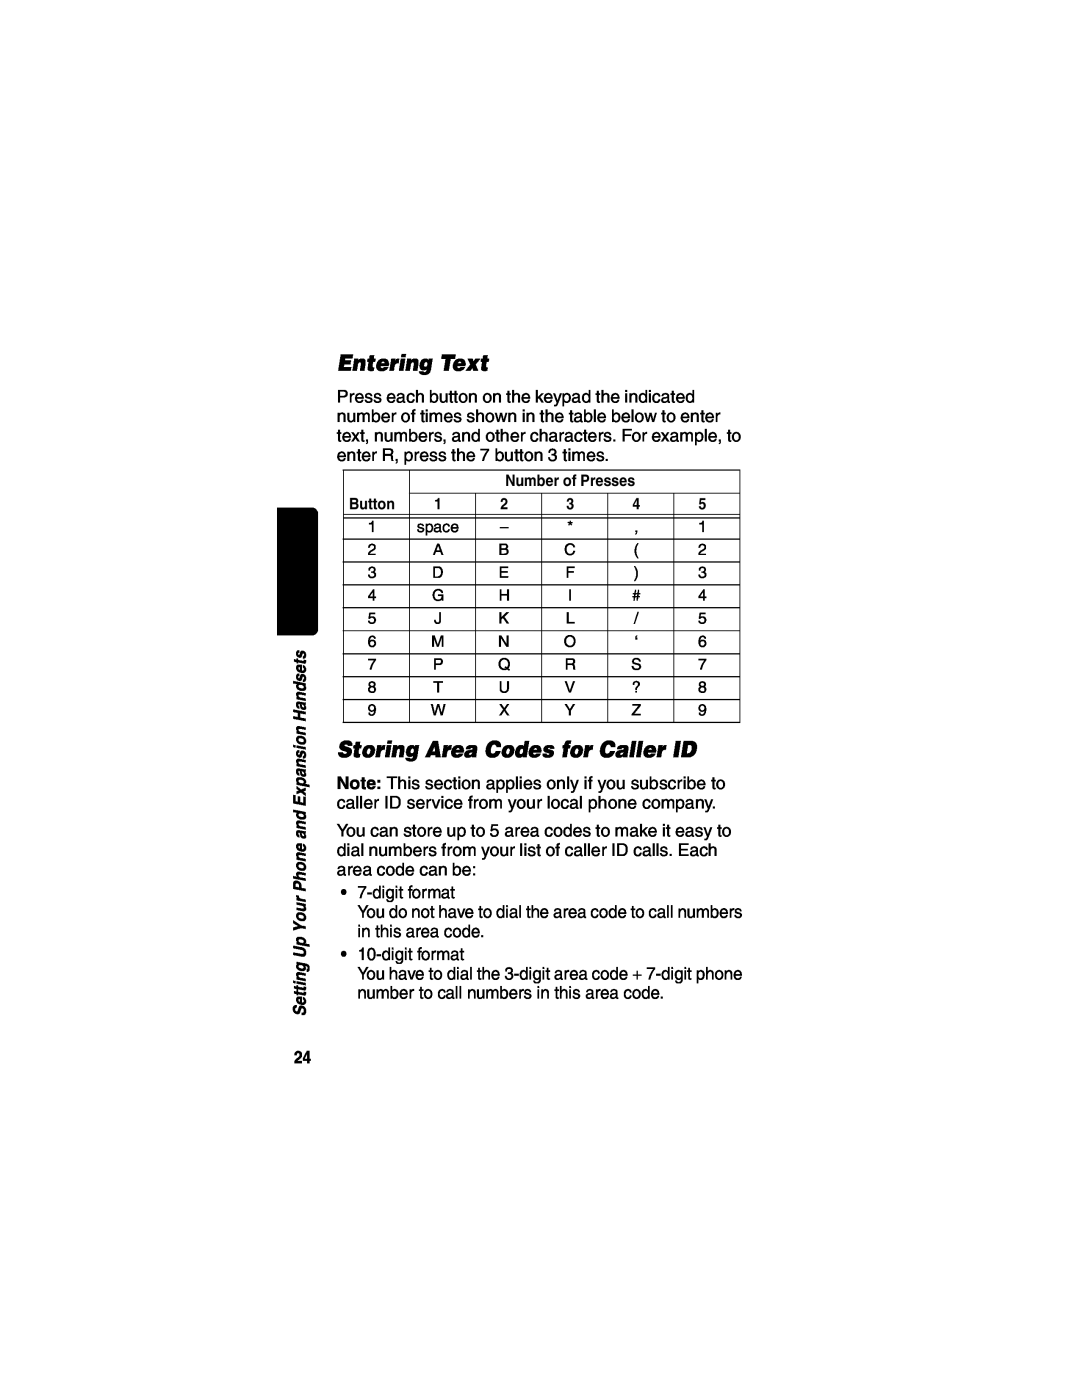 Motorola MD490 manual Entering Text, Storing Area Codes for Caller ID 